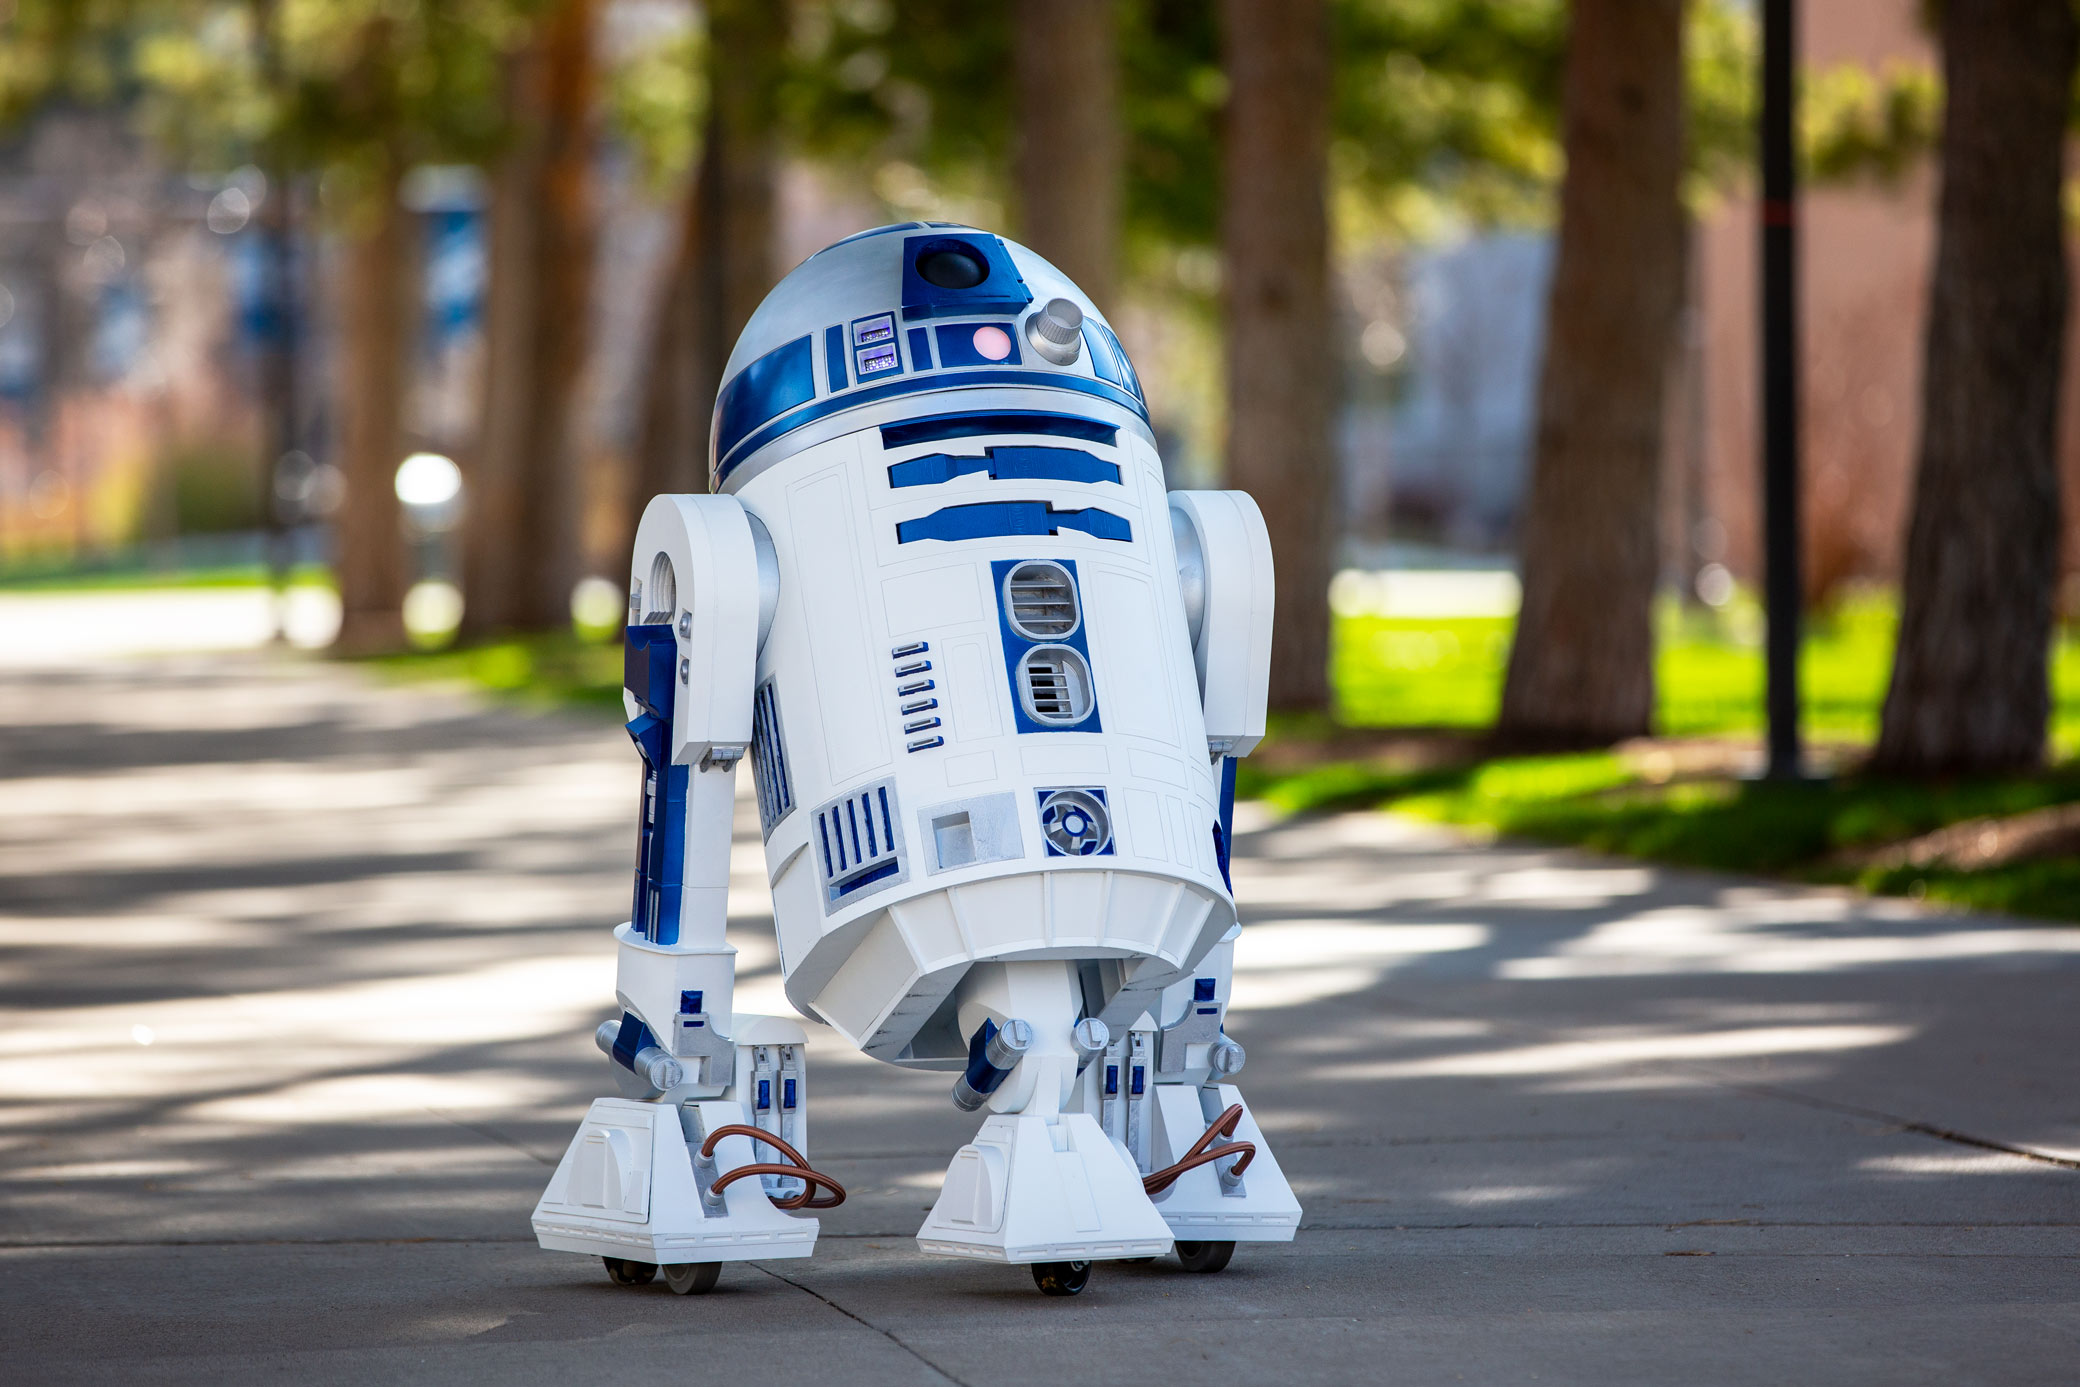 R2D2 model that a USU student made